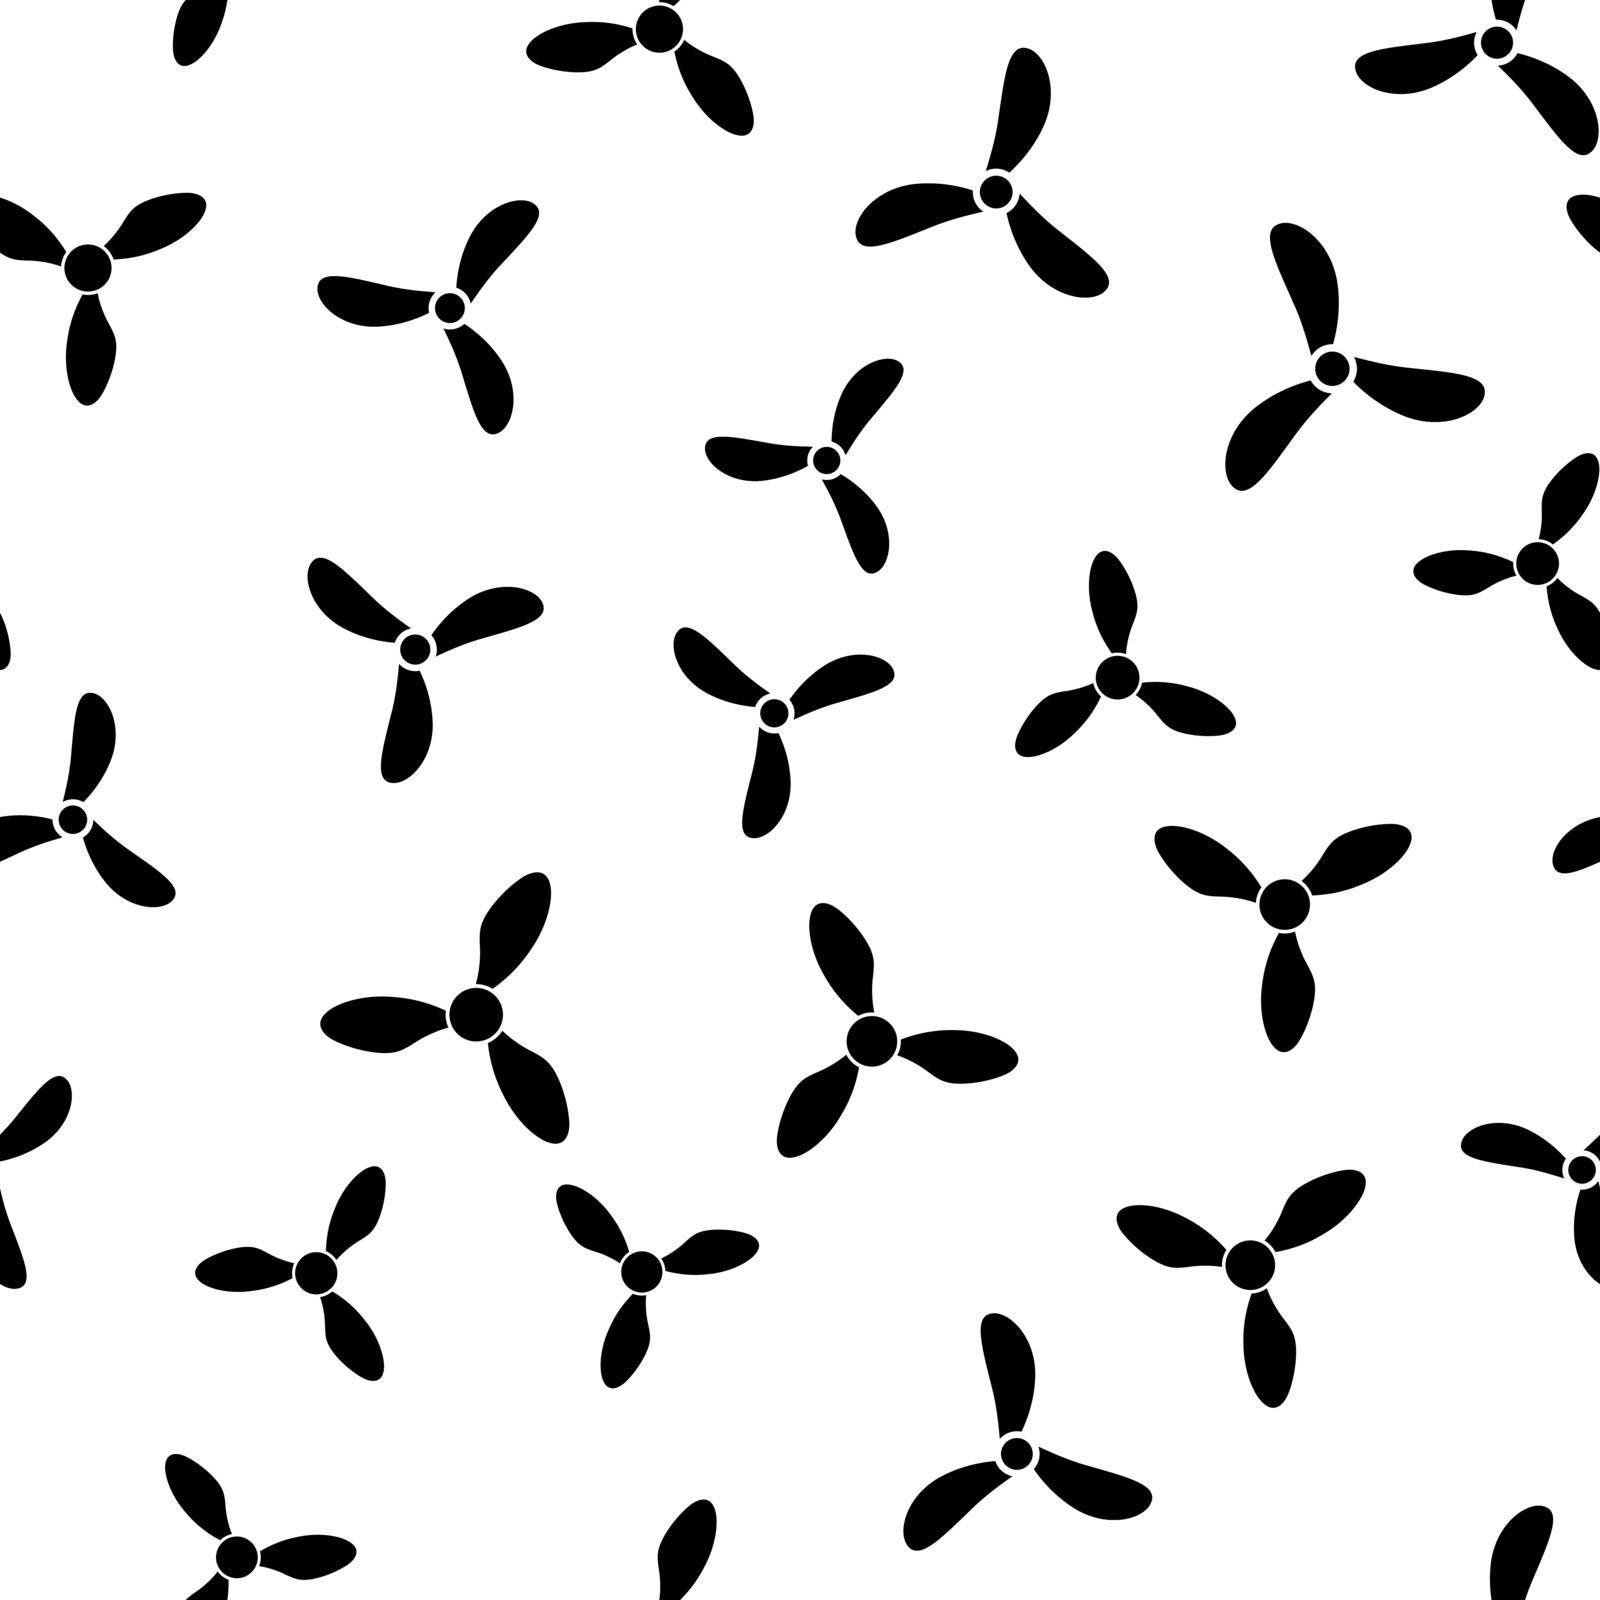 Propeller Silhouette Seamless Pattern by valeo5